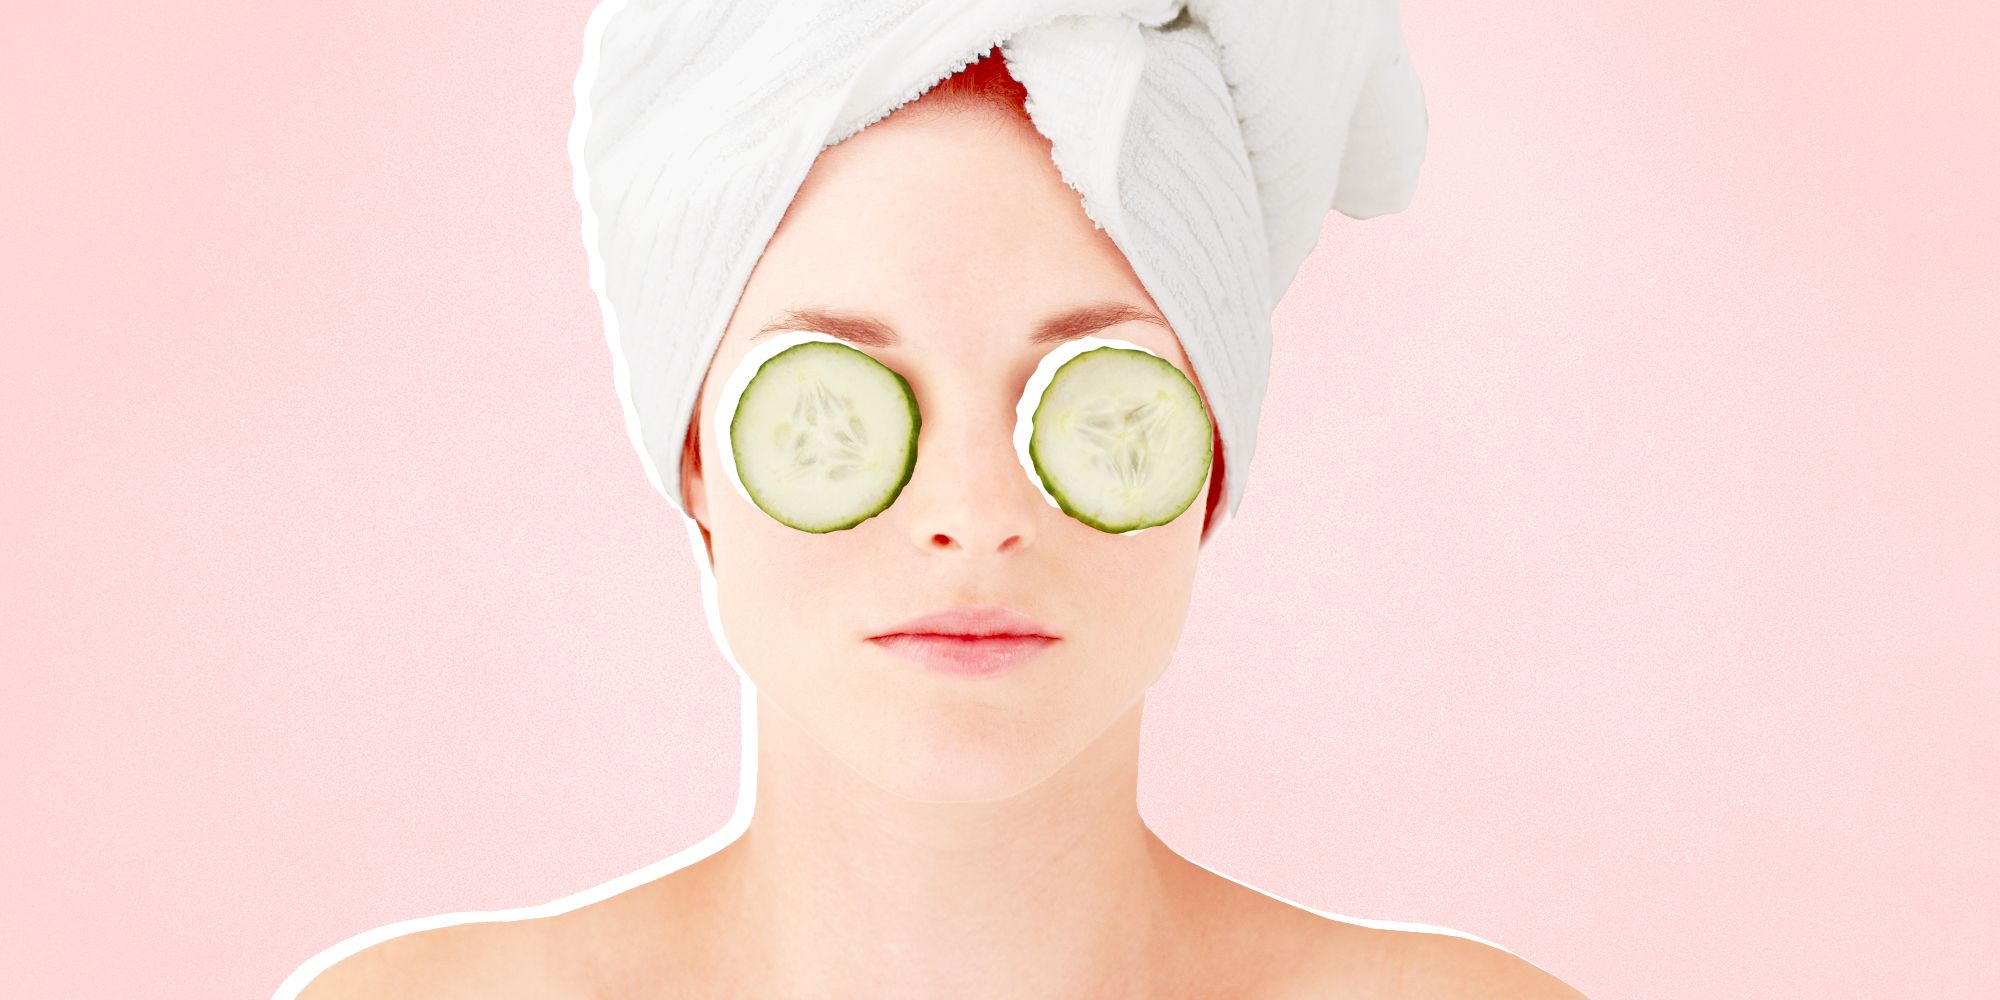 6 Steps for an At-Home Facial - How to Give Yourself a DIY Spa